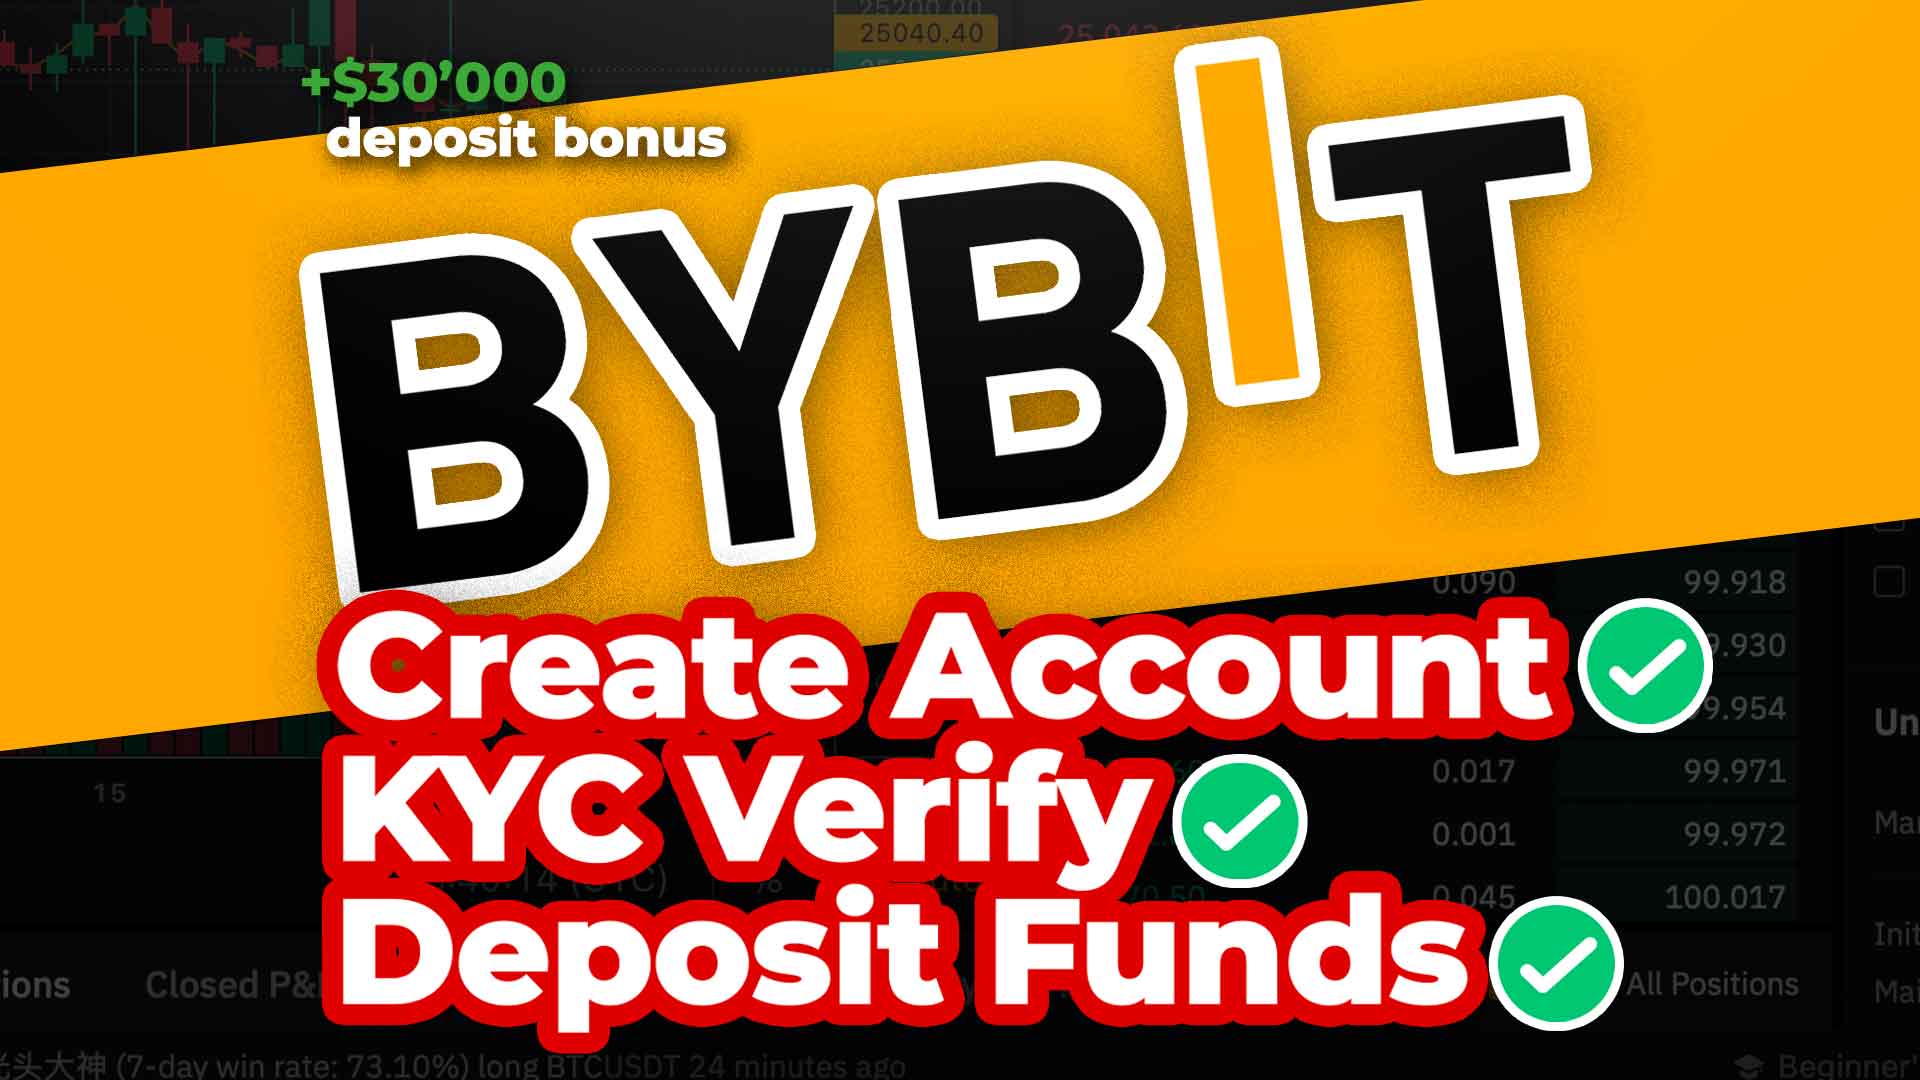 Bybit Account Setup | How to Create an account, Verify (KYC) and deposit funds